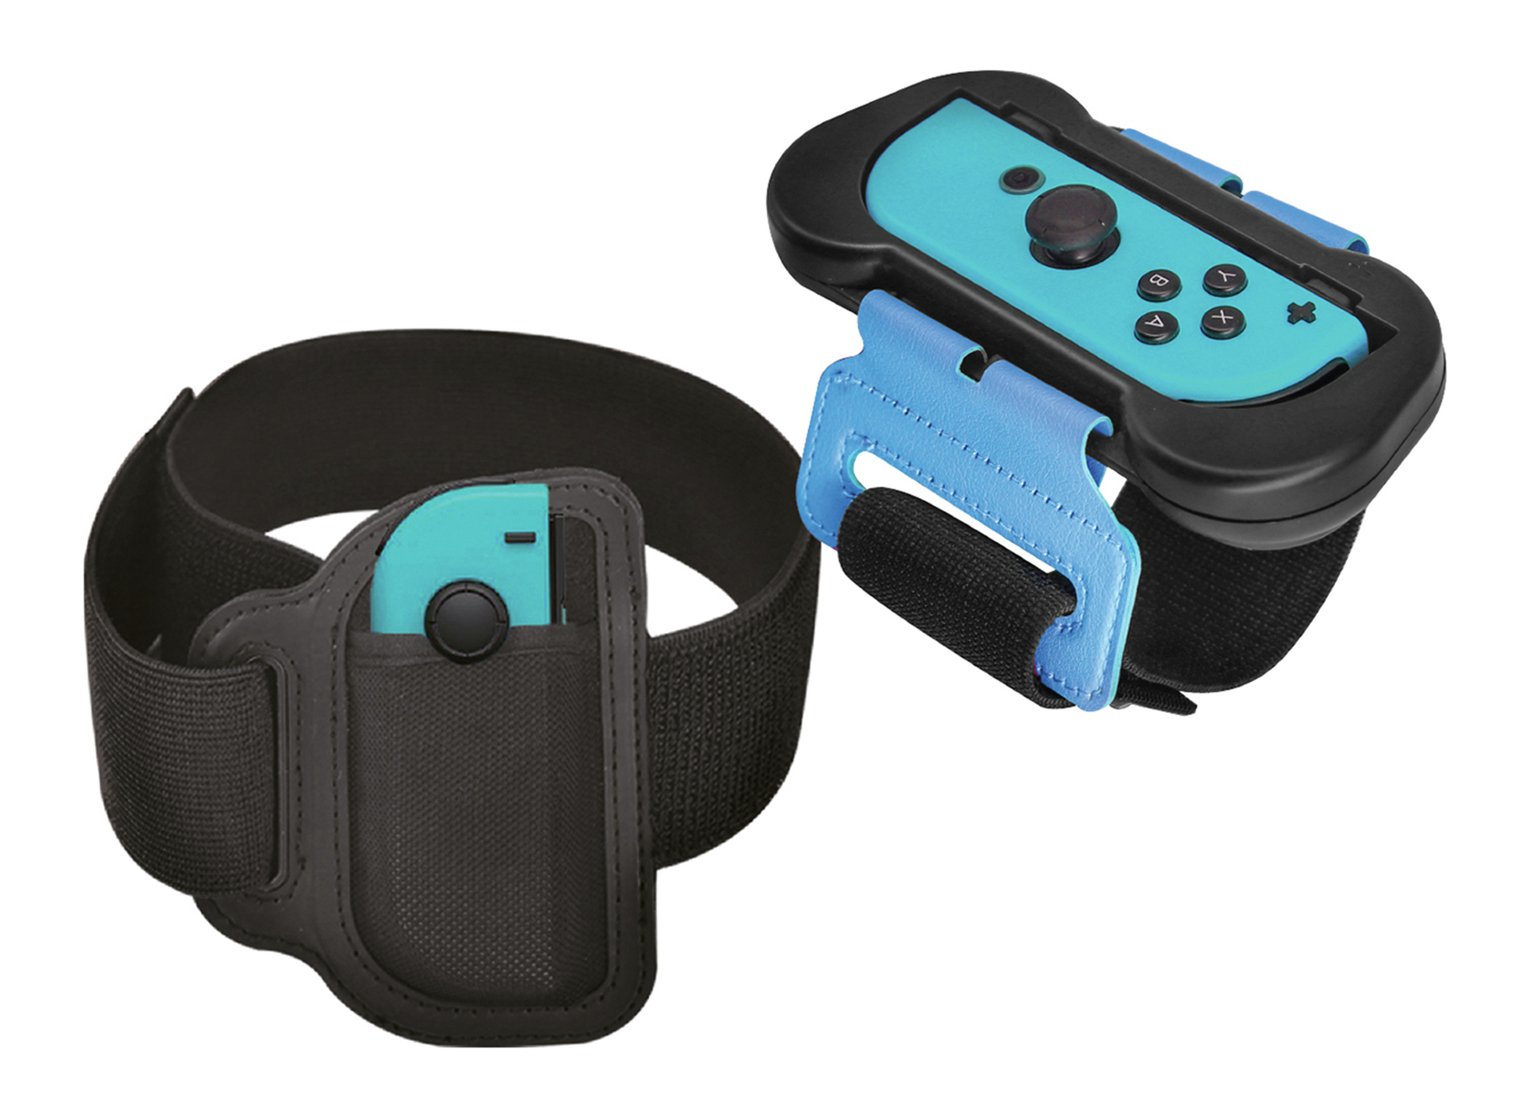 Numskull Nintendo Switch Ring Fit & Just Dance Accessory Kit Review